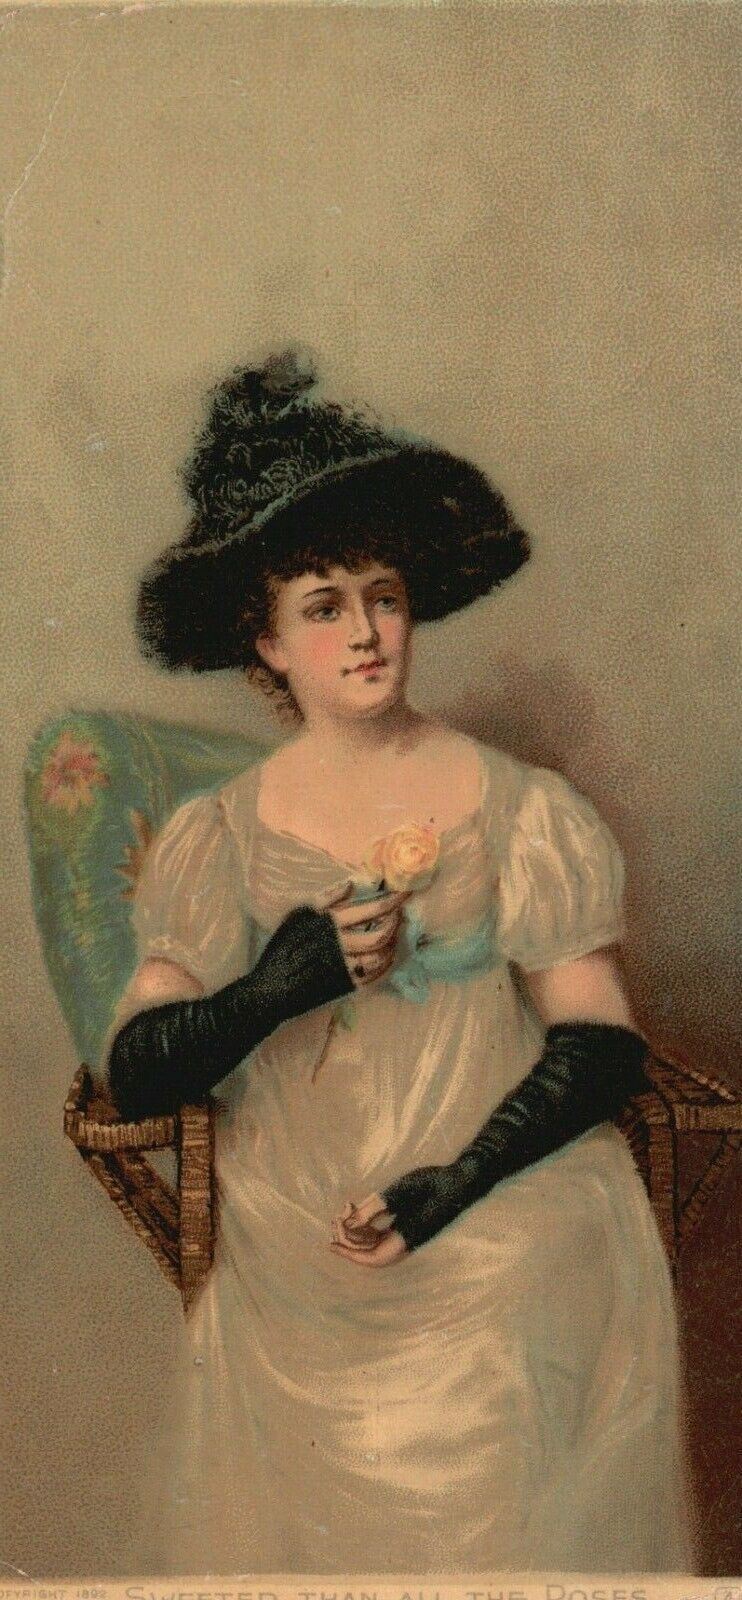 1880s-90s Victorian Woman in Black Hat Rose Sweeter Than All The RosesTrade Card